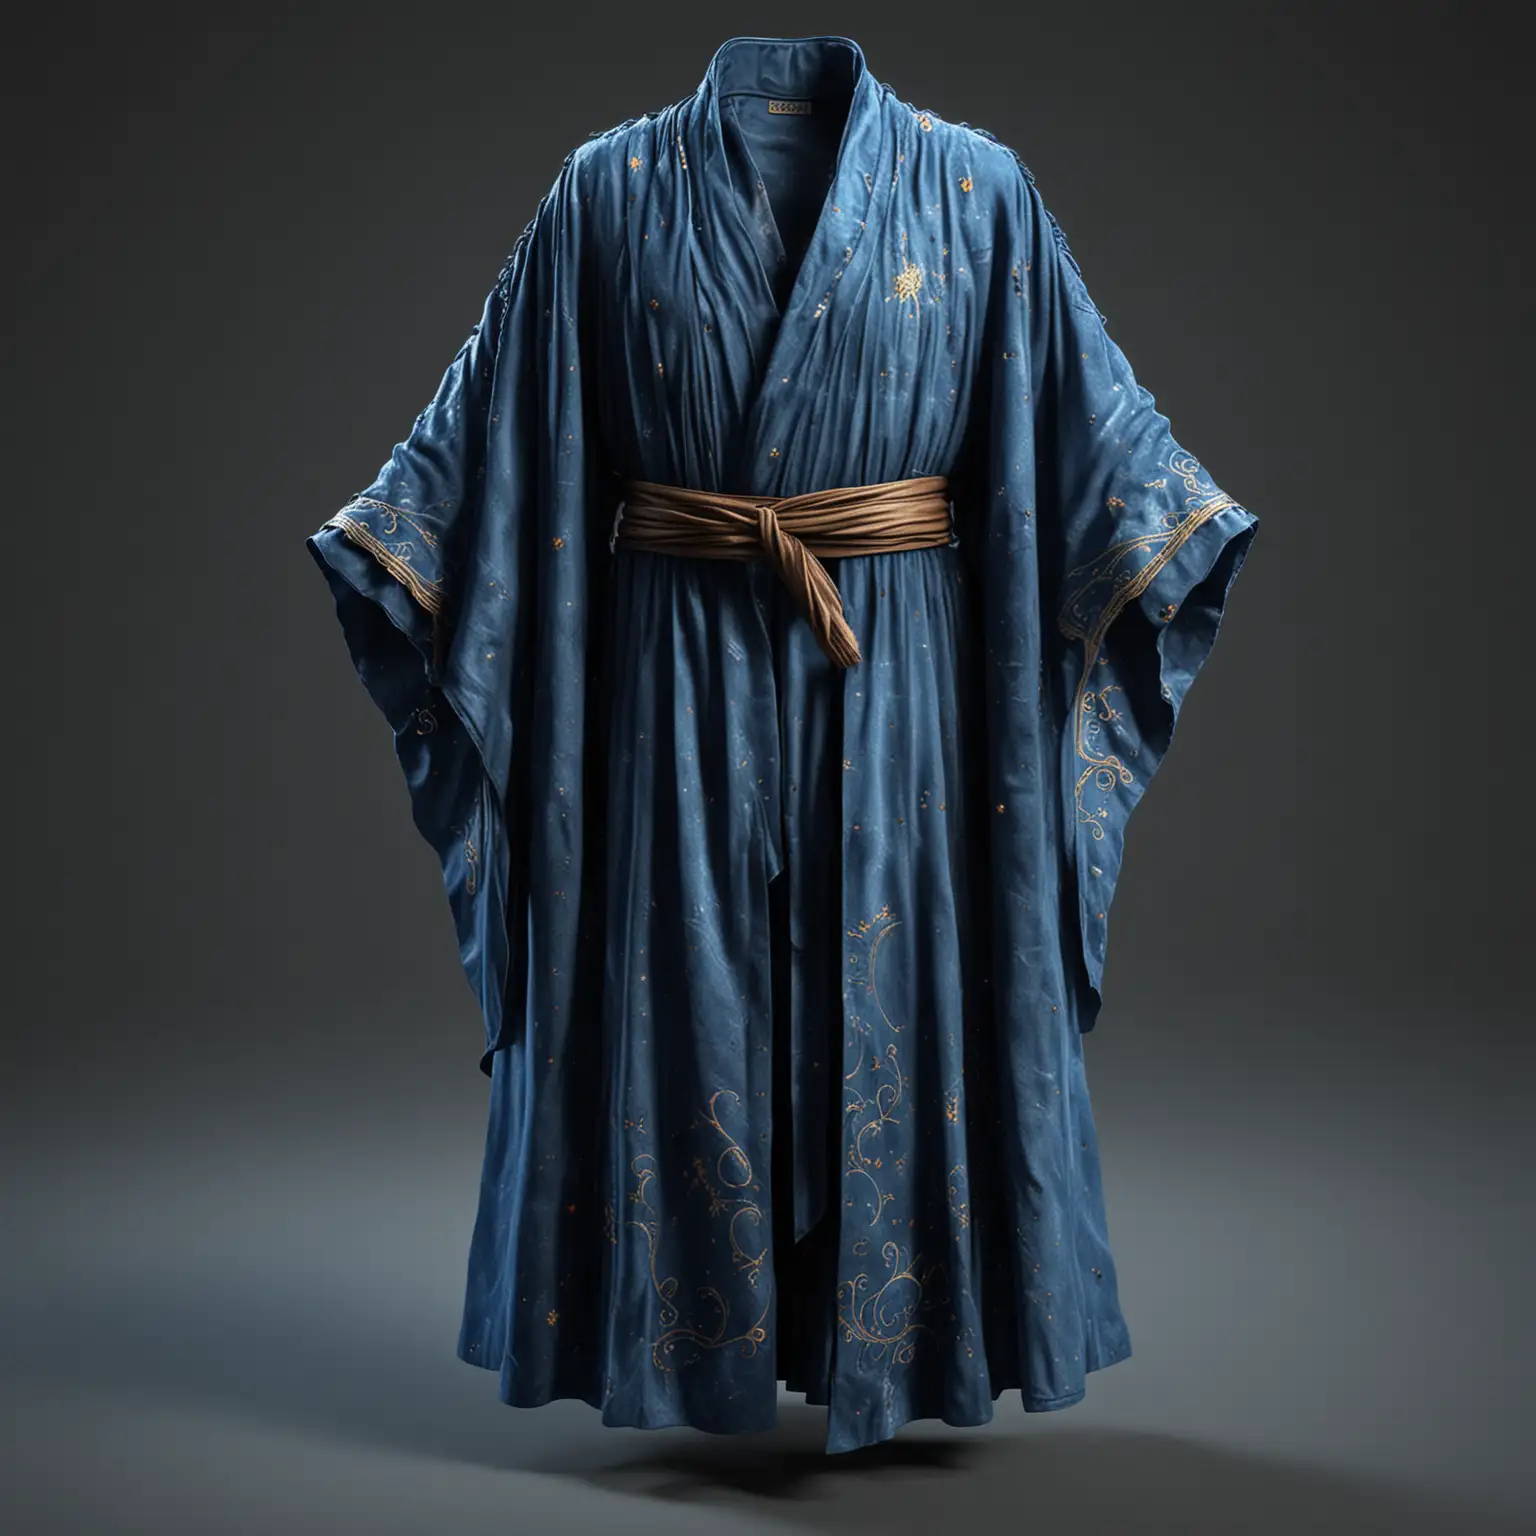 Realistic Blue Magical Robe in Fantasy Setting